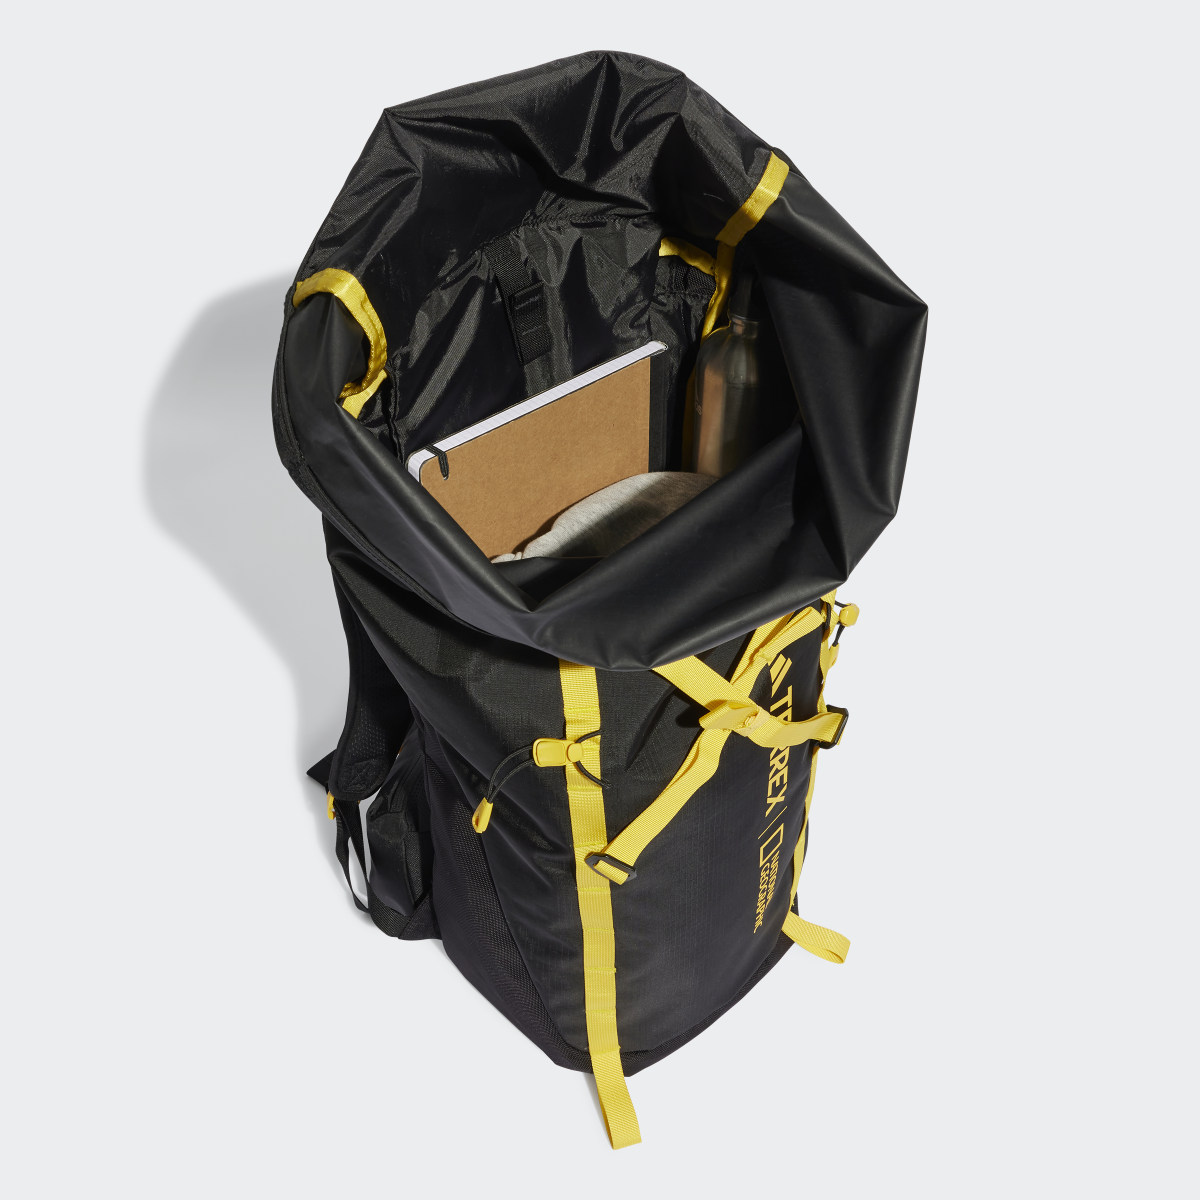 Adidas Colorful x National Geographic AEROREADY Backpack. 5